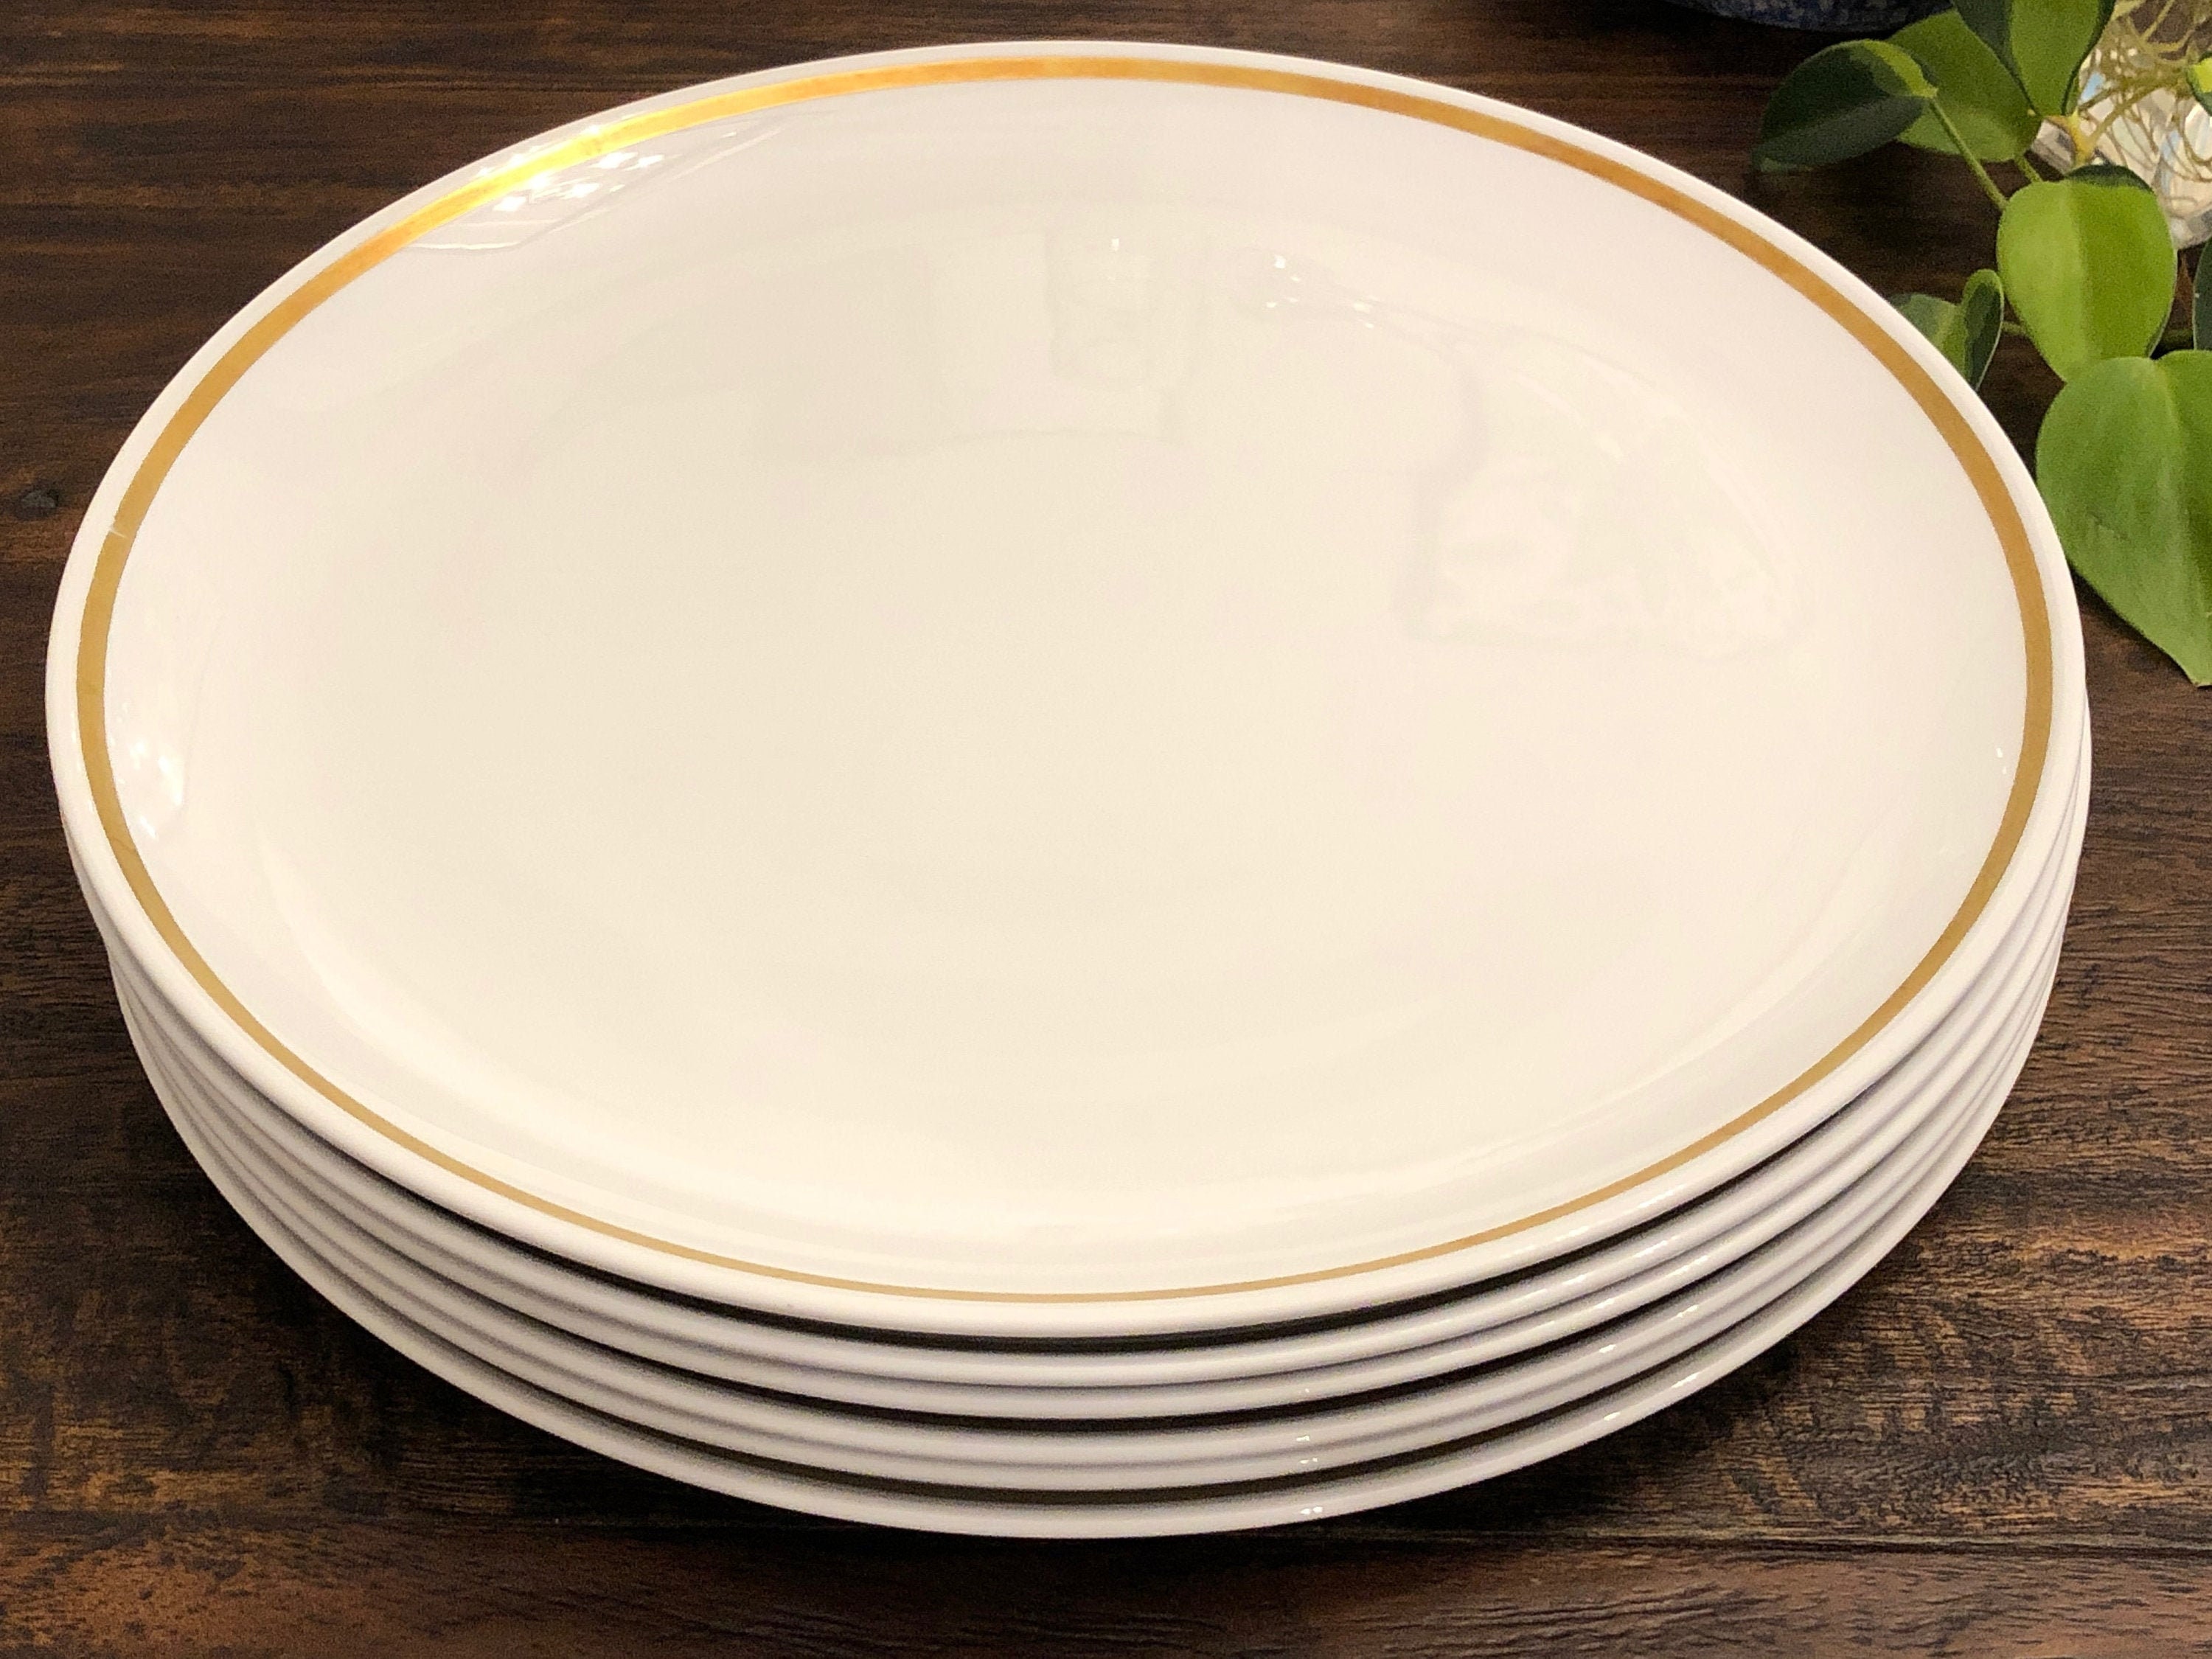 Vintage Centura by Corning All White Dinner Plates sold in sets of 4 